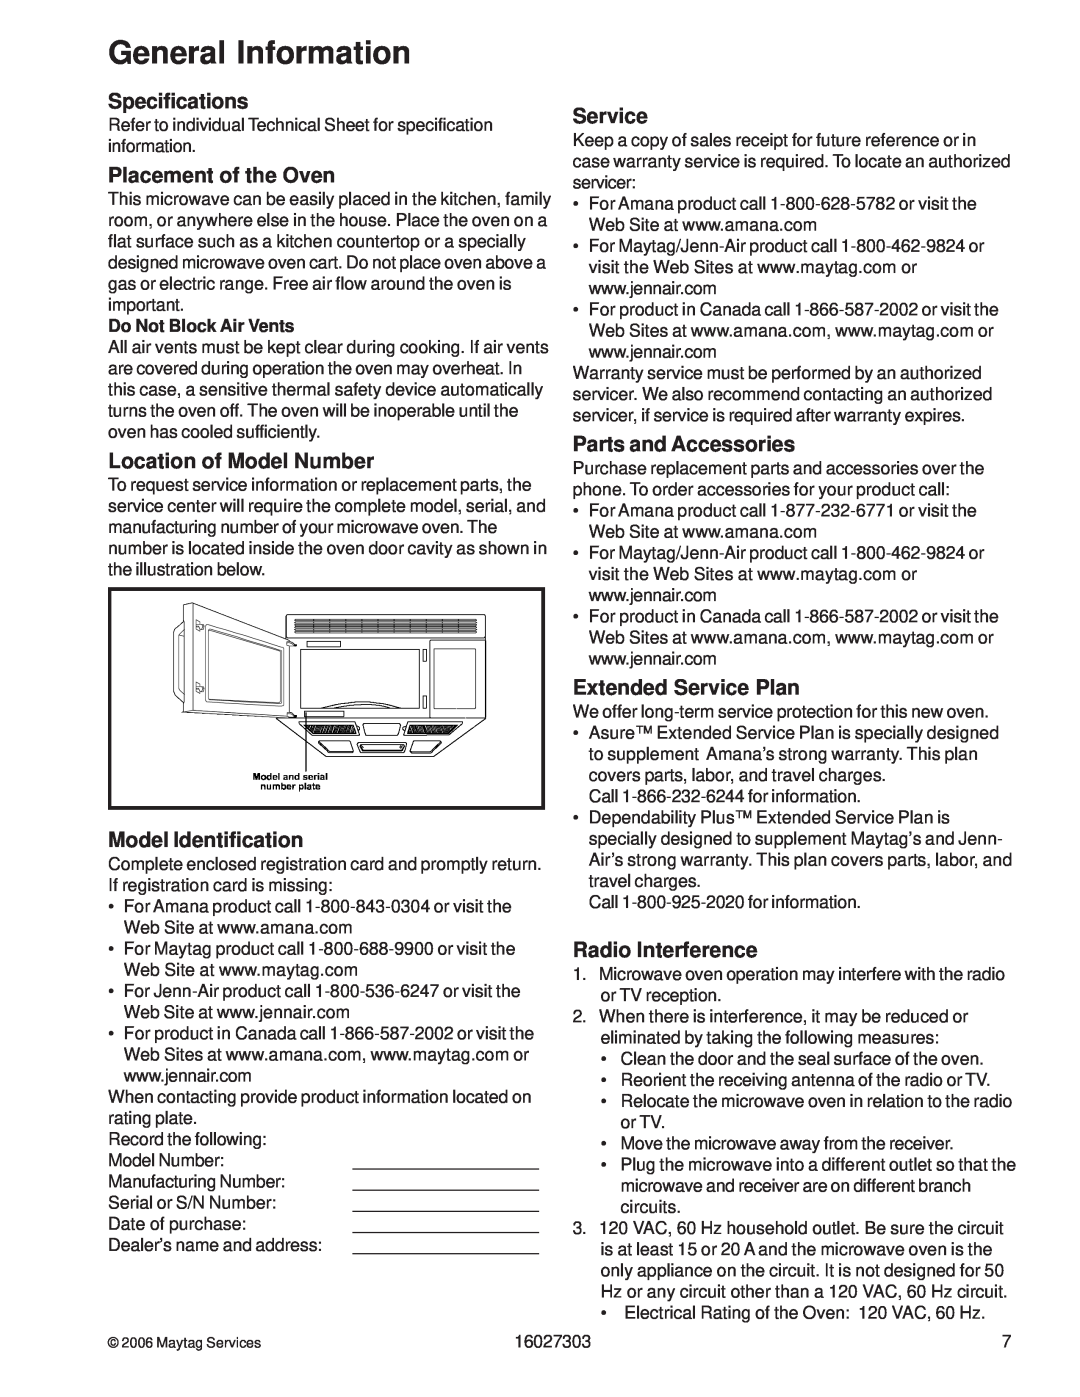 Maytag UMV1152CA manual Specifications, Placement of the Oven, Location of Model Number, Model Identification, Service 